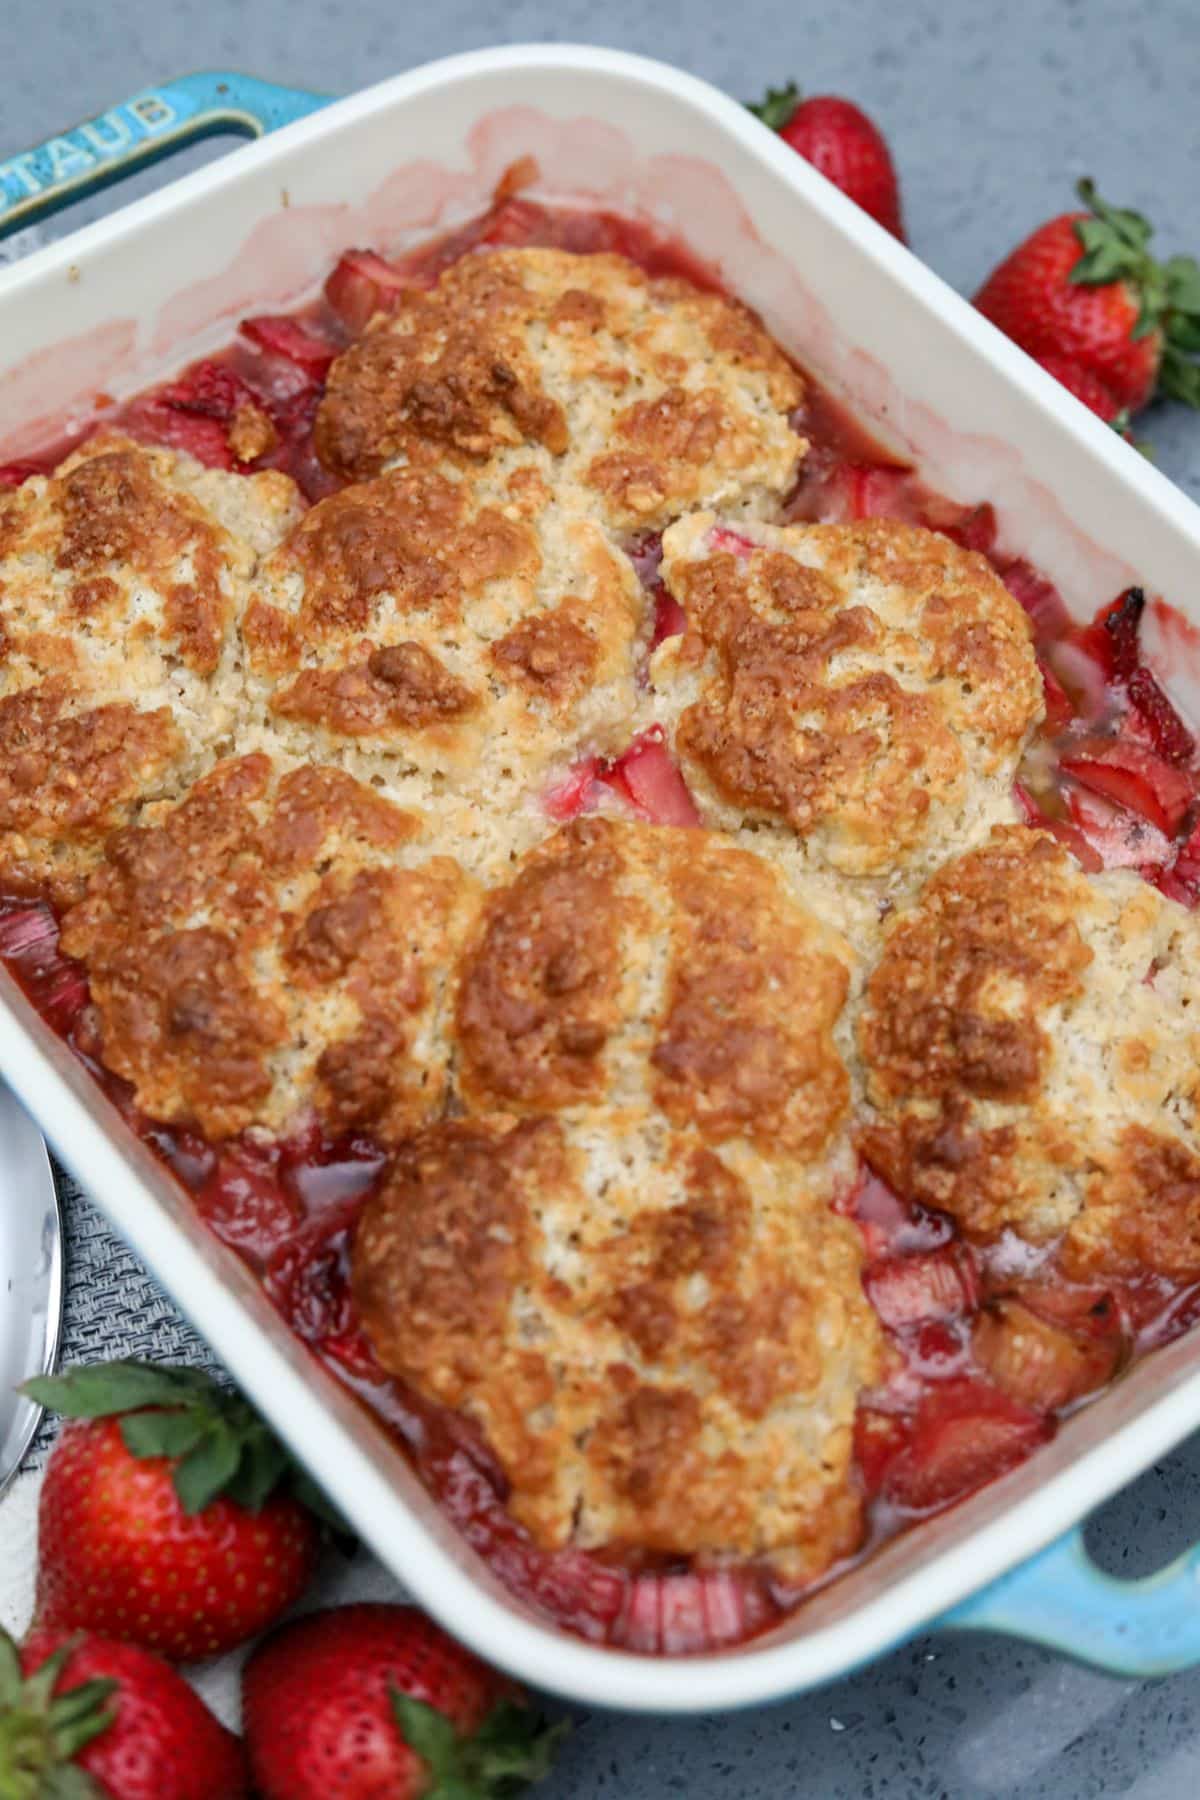 Strawberry and rhubarb cobbler